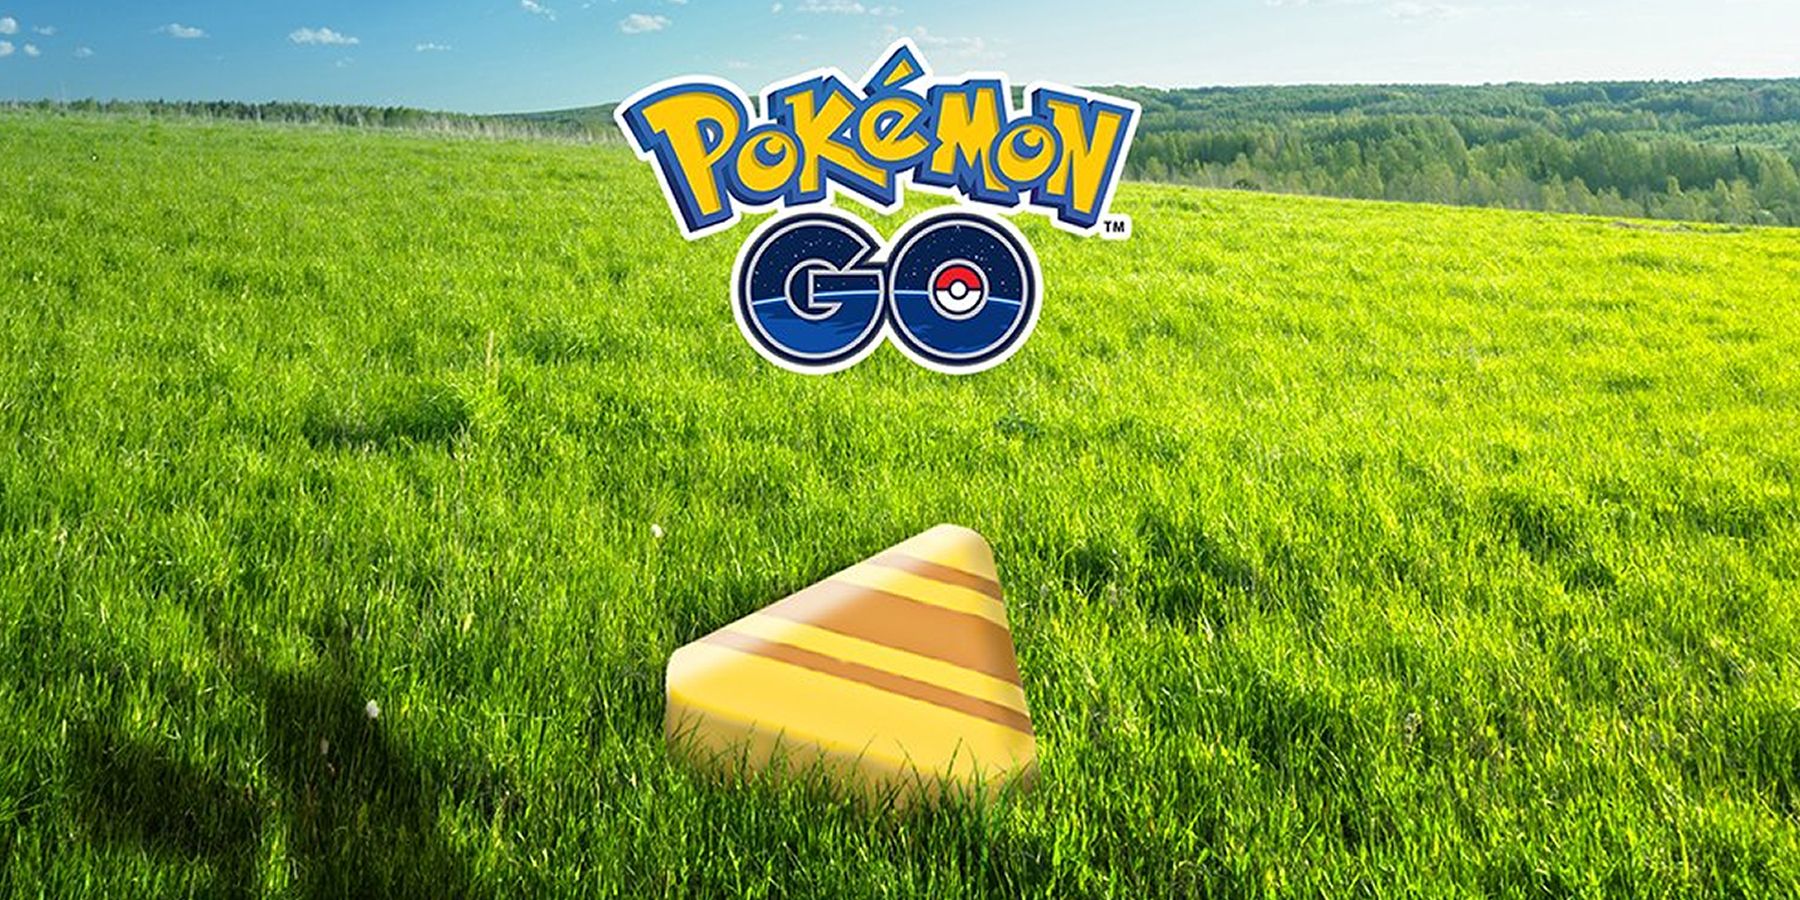 Here's The 'Pokémon GO' Candy You Should Be Saving For Gen 2 Evolutions